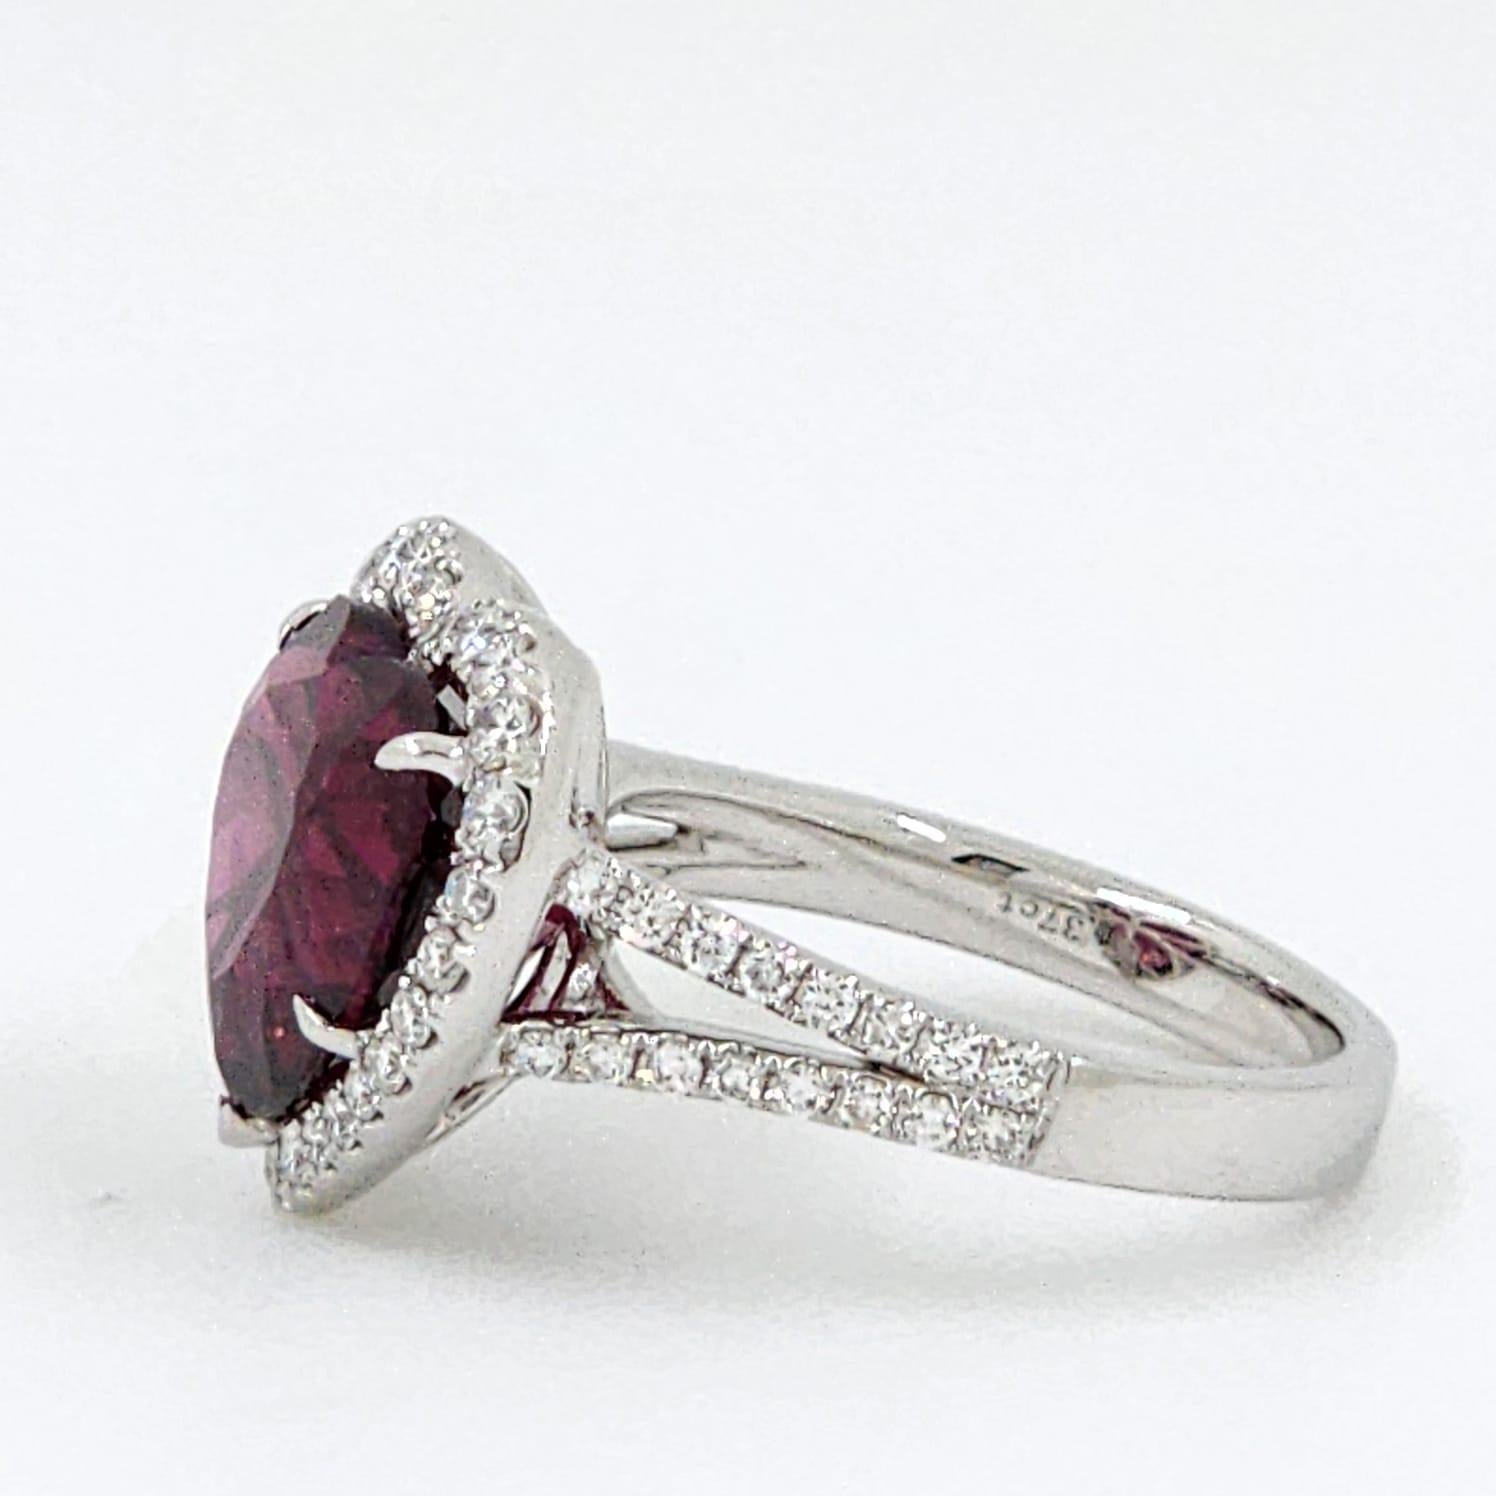 Heart Cut GIA Certified 7.37 Carat Heart Garnet and Diamond Ring in 18K White Gold For Sale